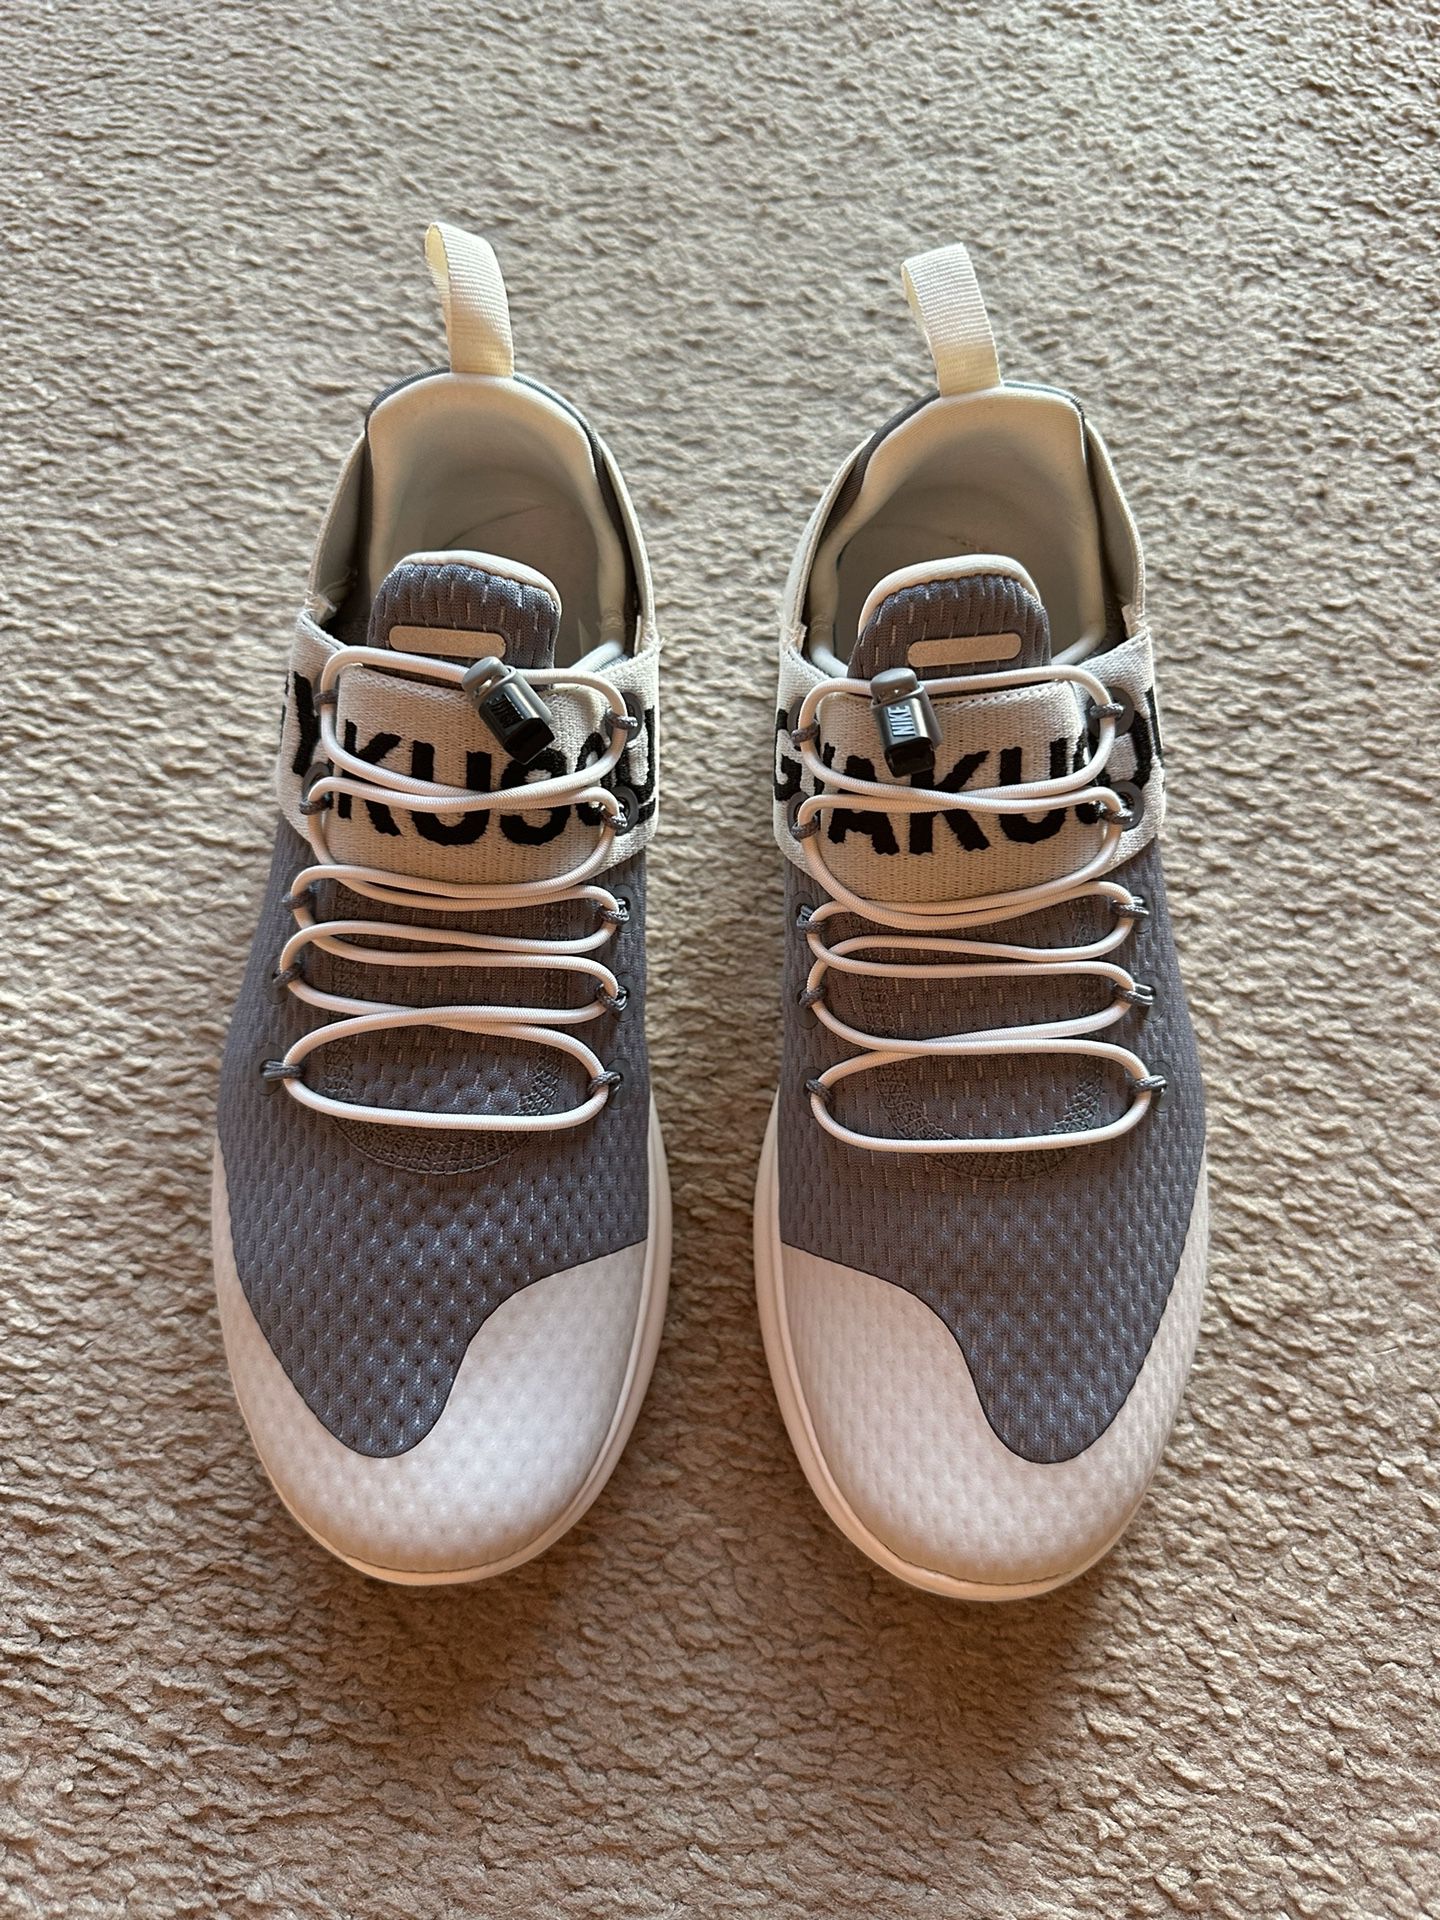 Nike Runner Shoes Limited for Sale in New York, NY - OfferUp